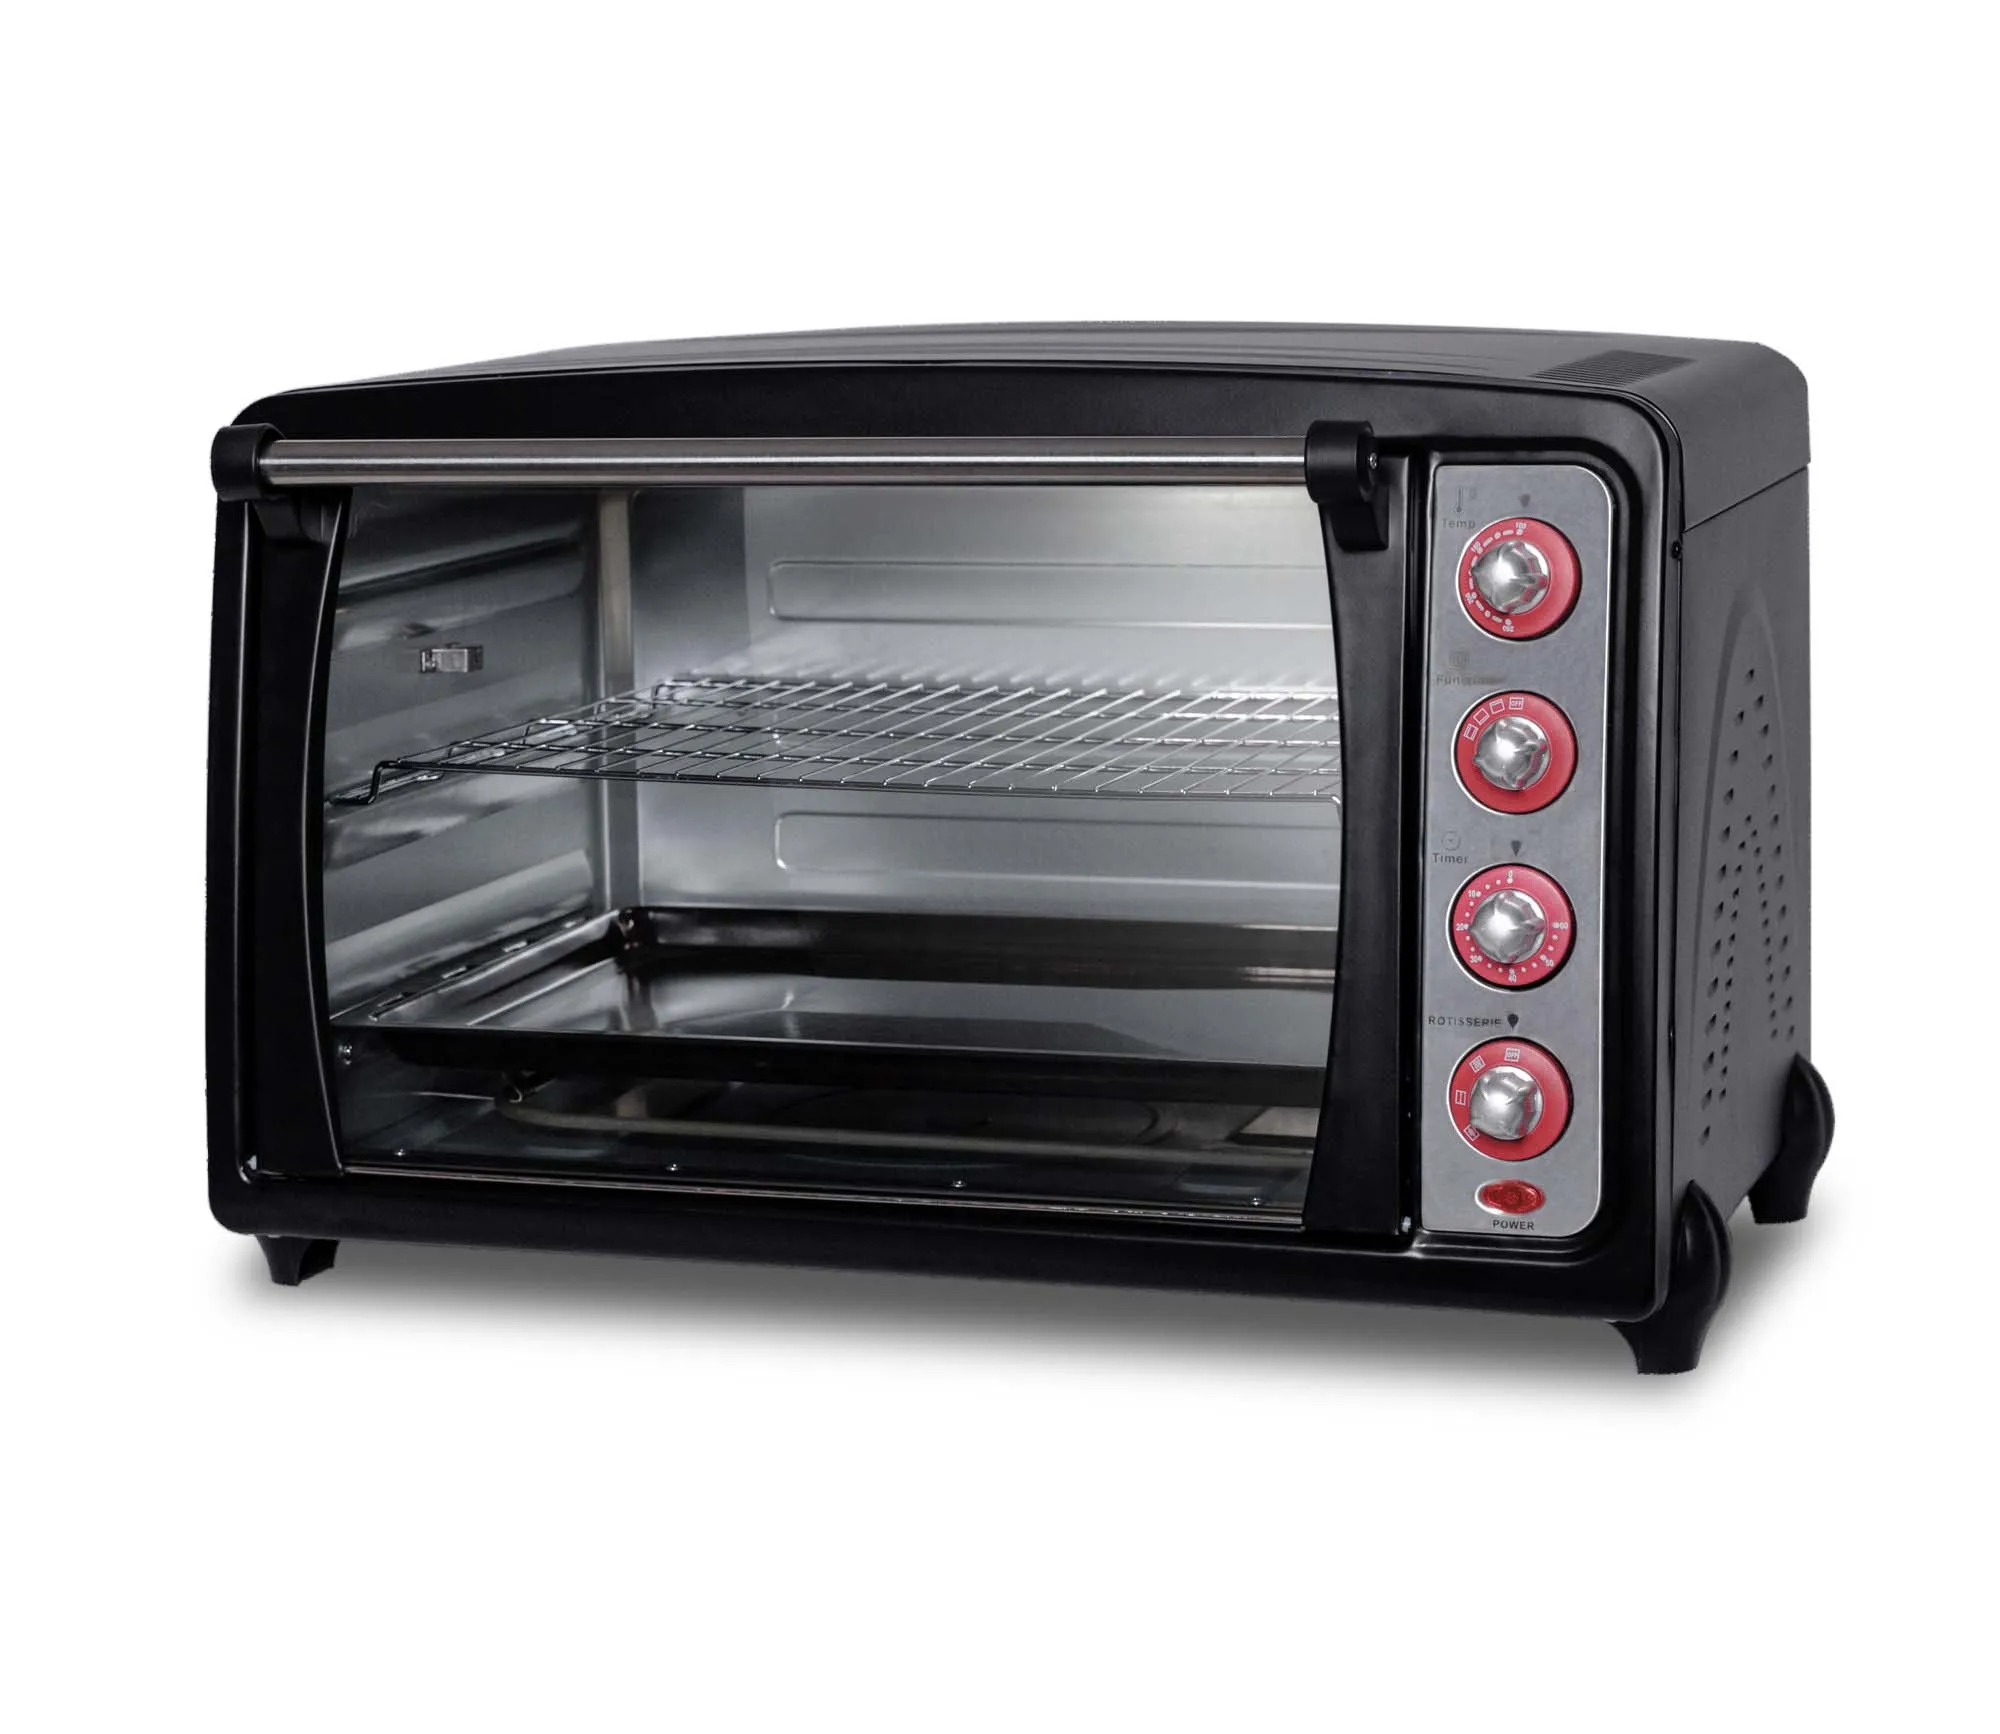  Multi-Function Electric Oven,Home Baking Small Oven 70